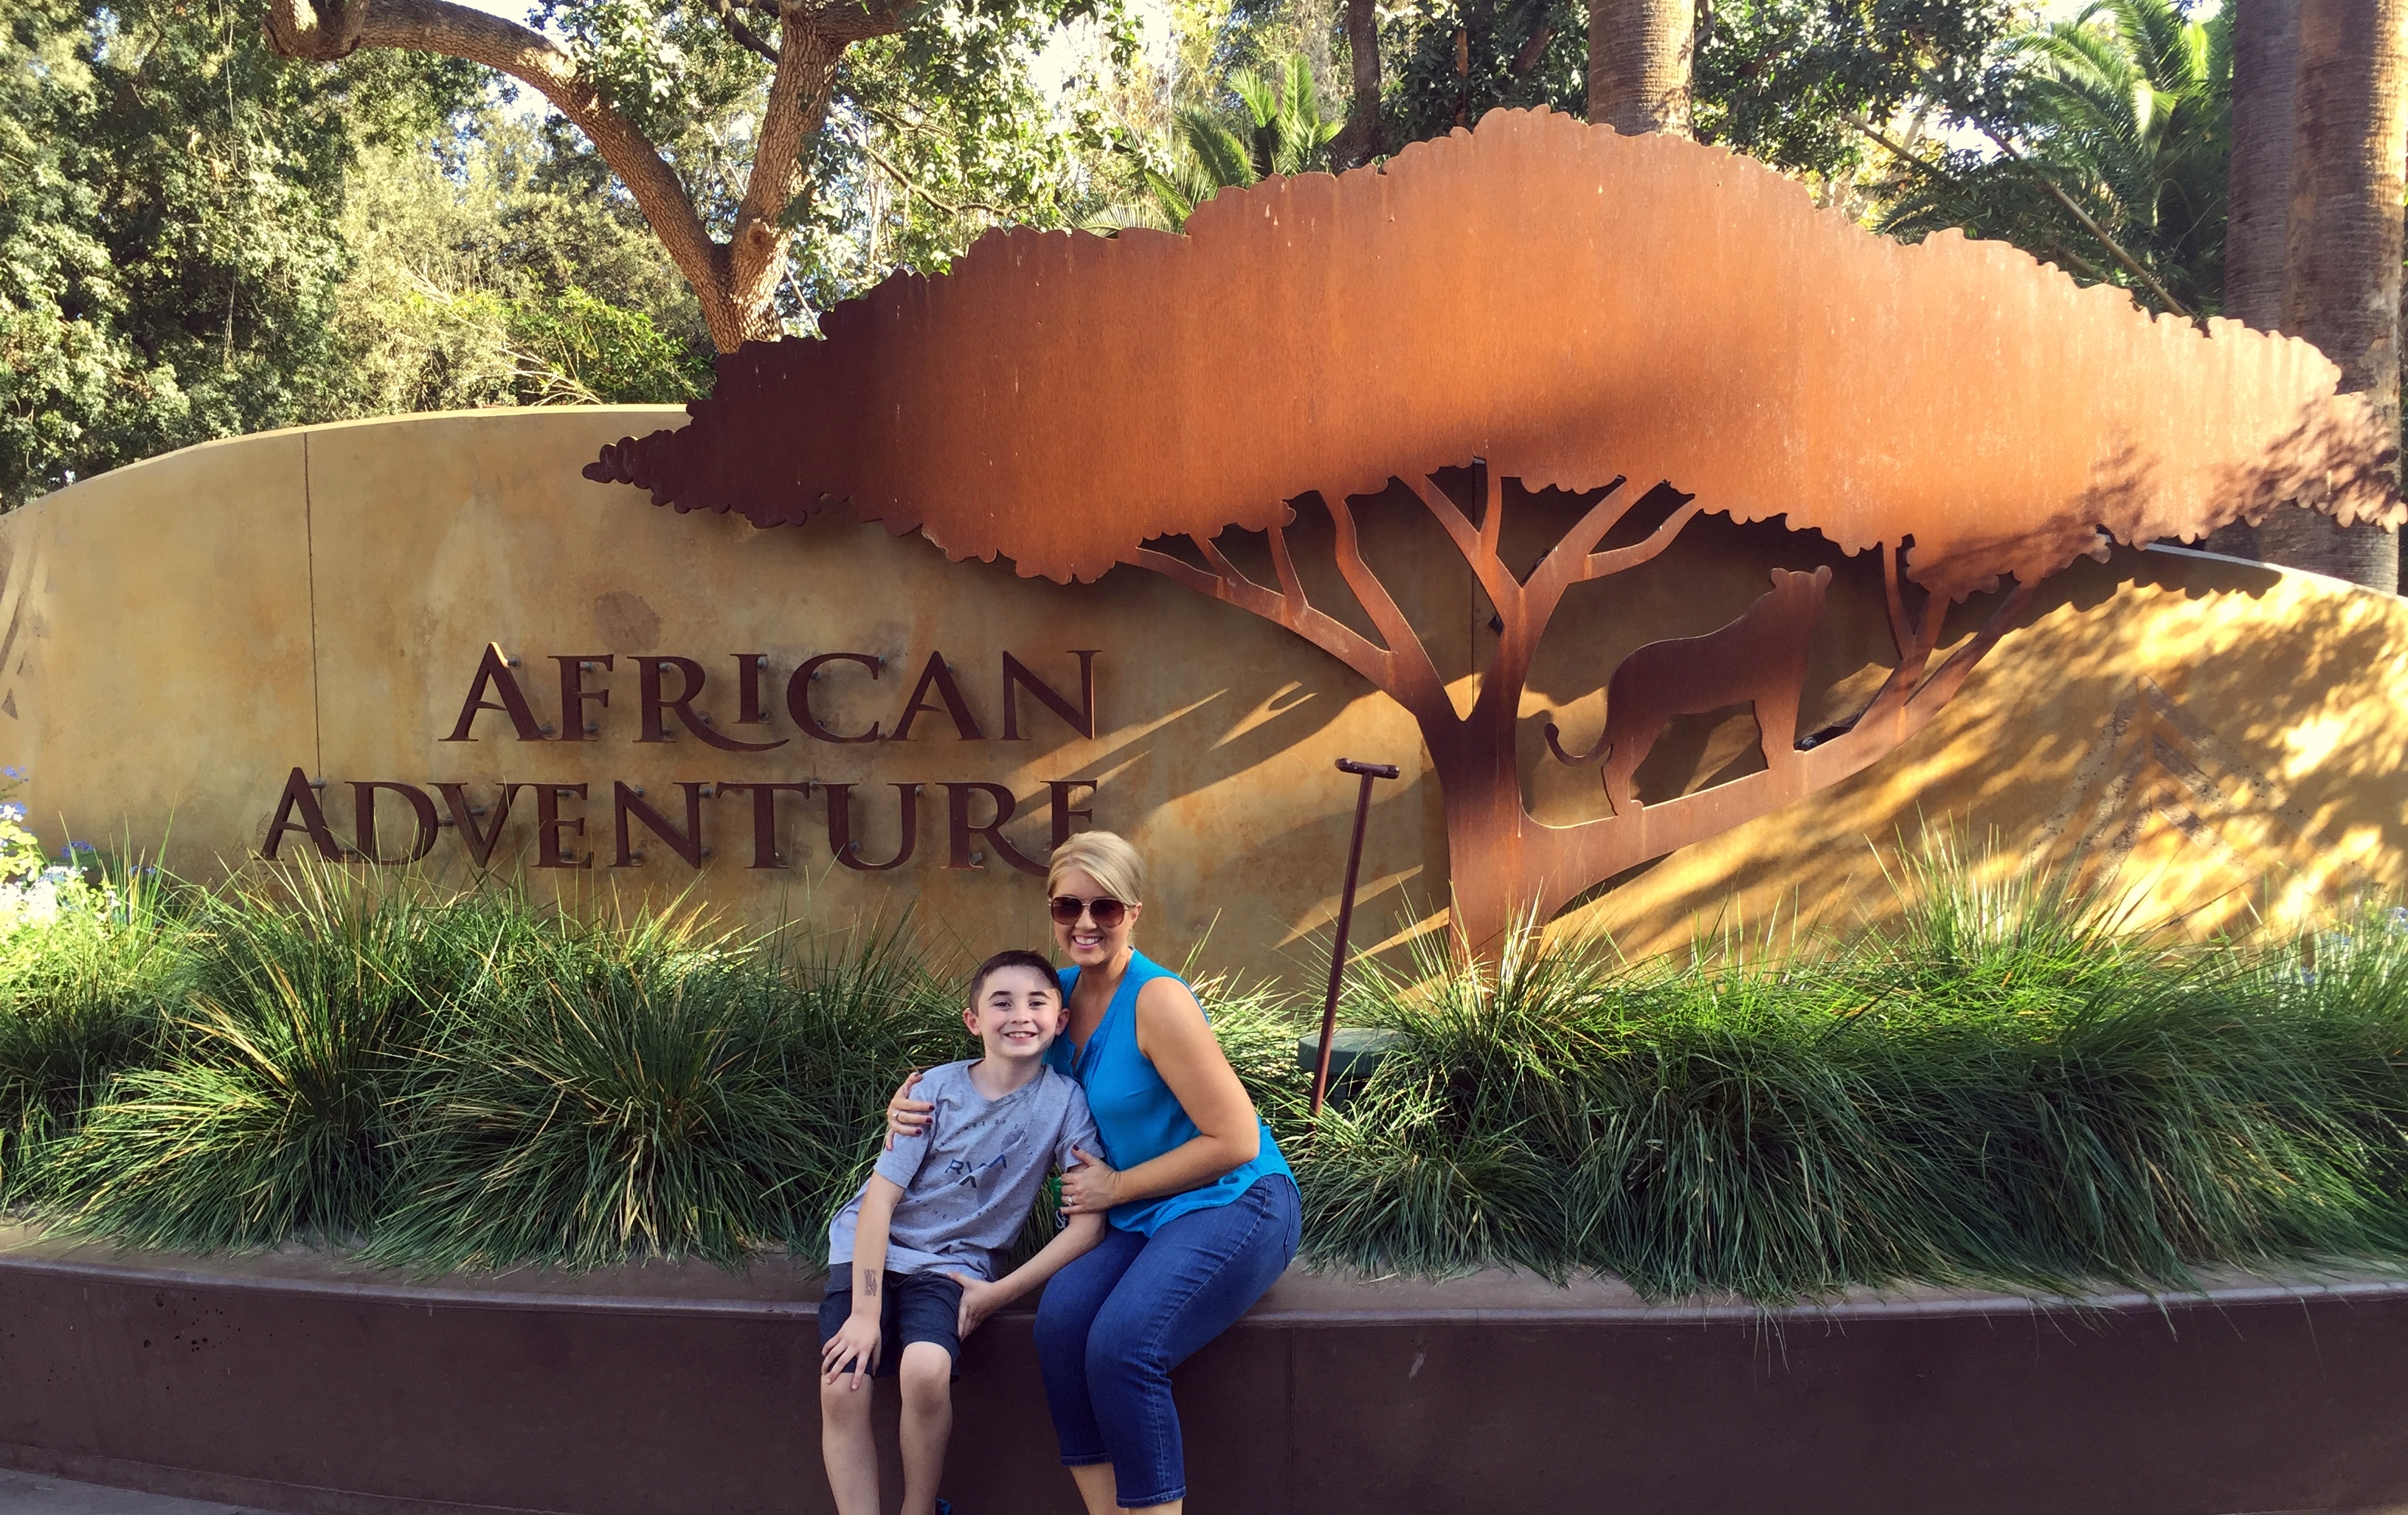 My son and I, ready to enter African Adventure